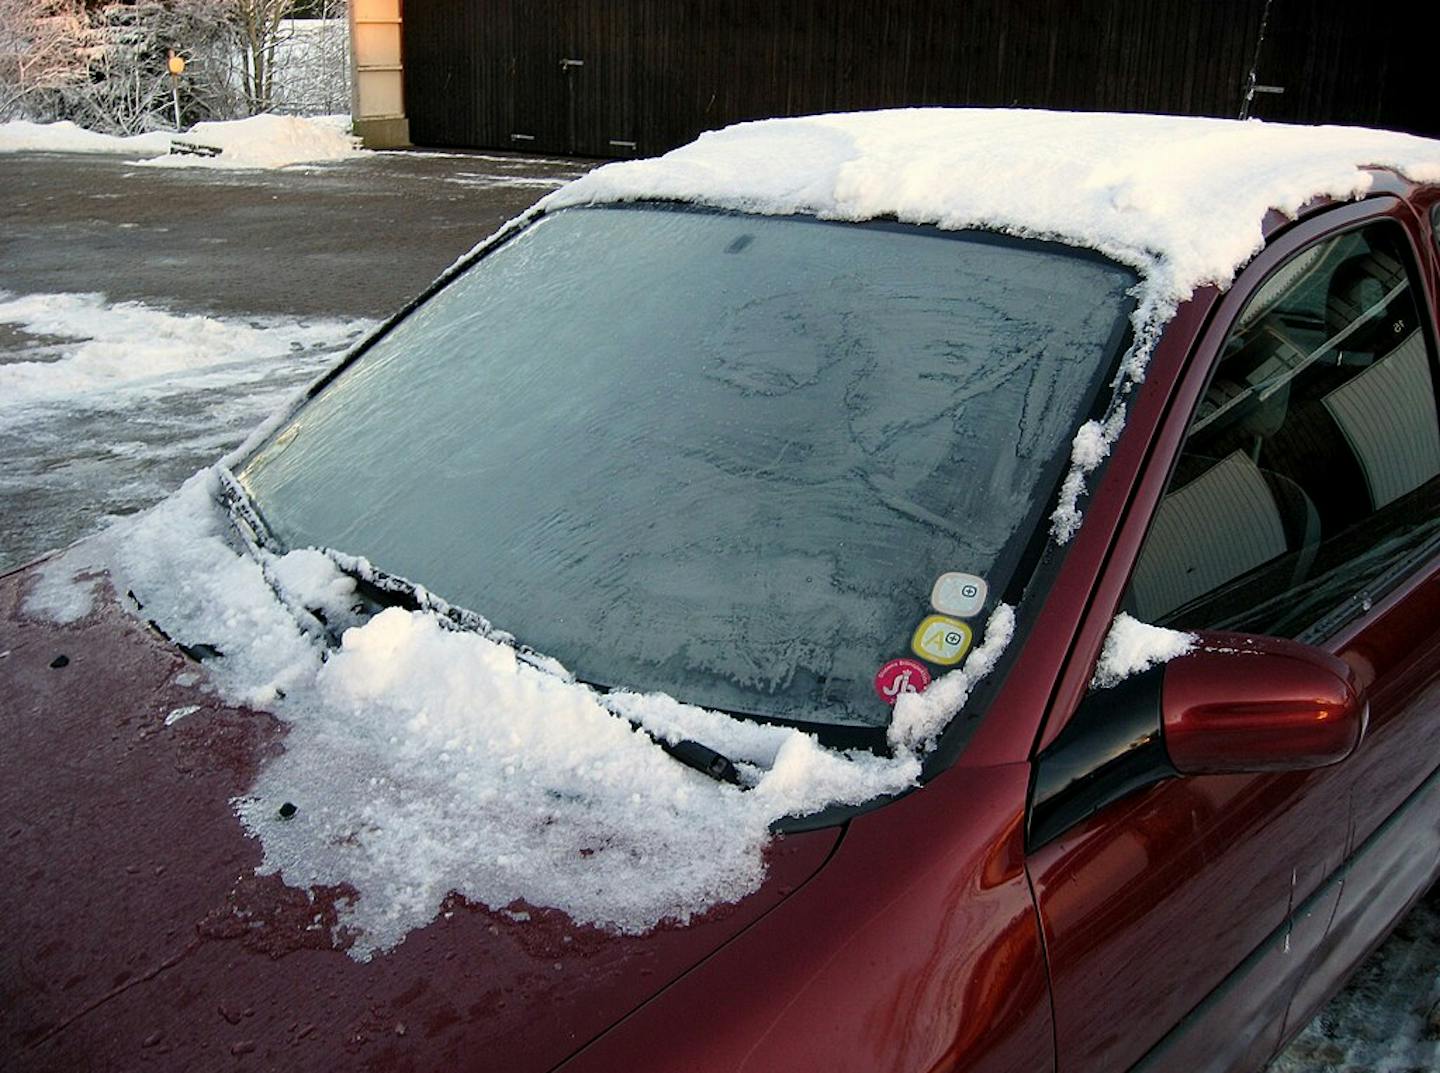 JTeena Windshield Cover for Ice and Snow, Extra Large Windshield